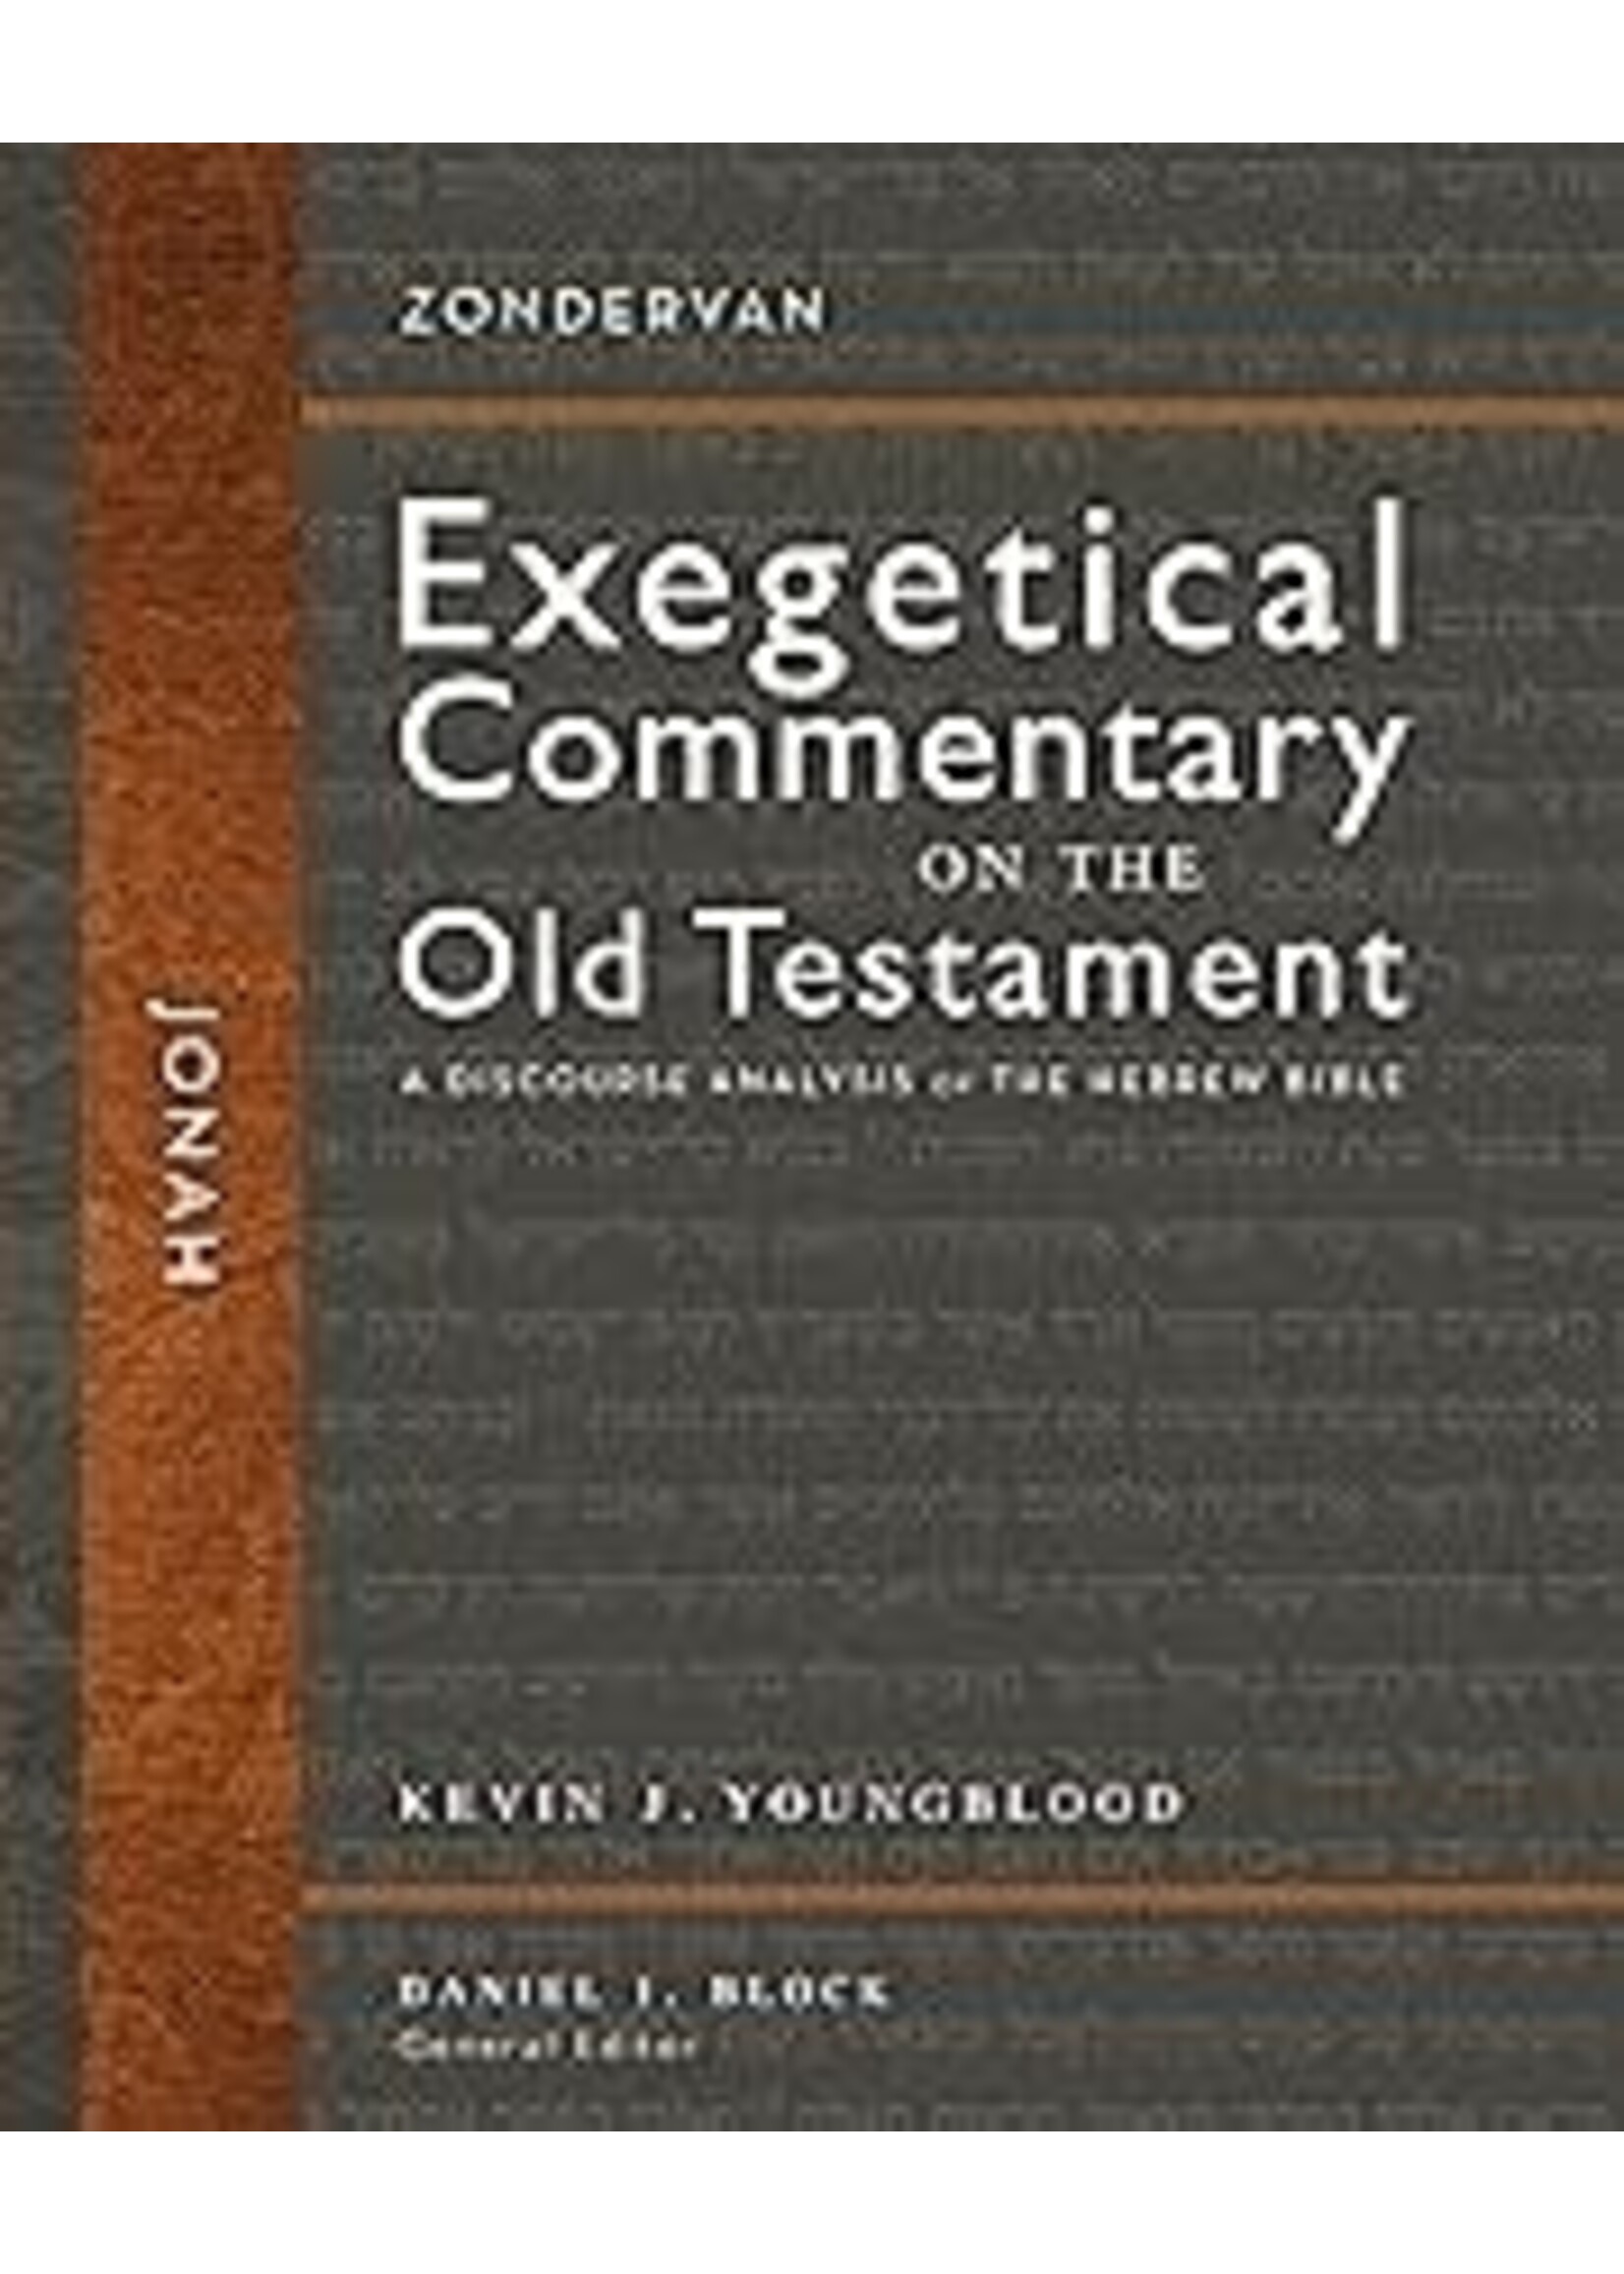 Jonah (first ed) Zondervan Exegetical Commentary on the Old Testament